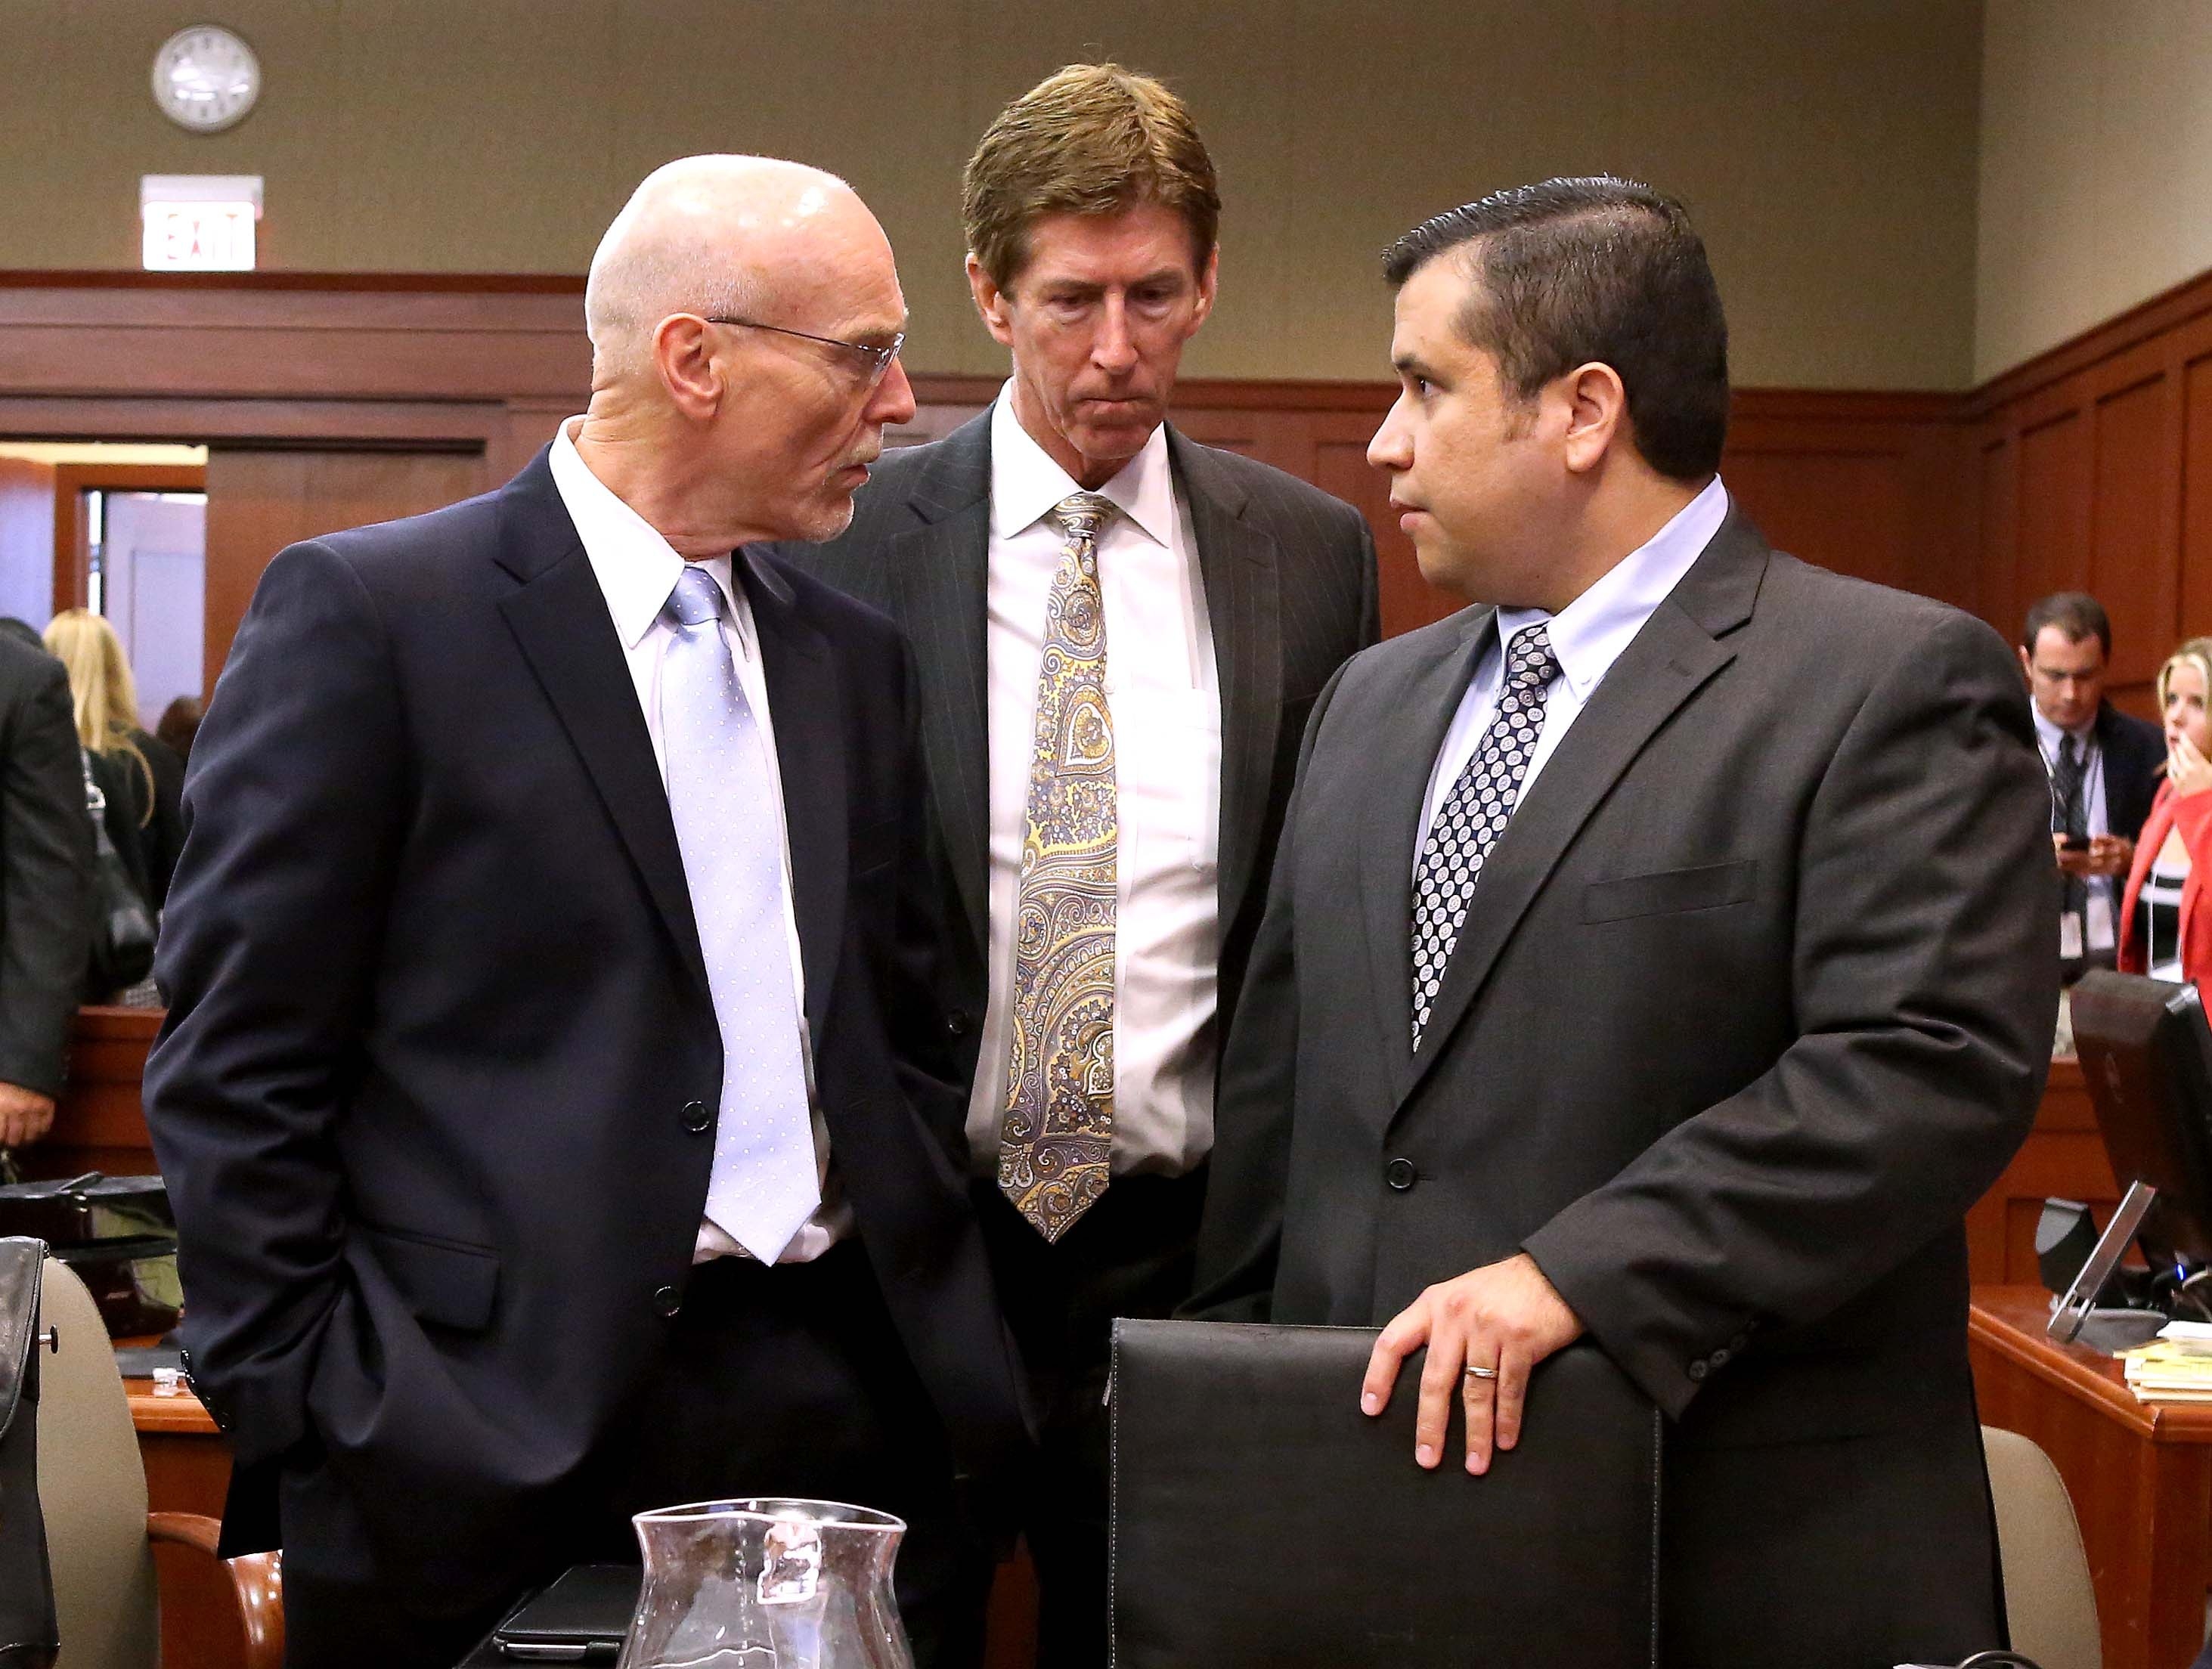 Co-counsel Don West (left) and Defence attorney Mark O'Mara (centre) talk with George Zimmerman during opening arguments in Seminole circuit court in Sanford in Florida. Photo: Reuters.